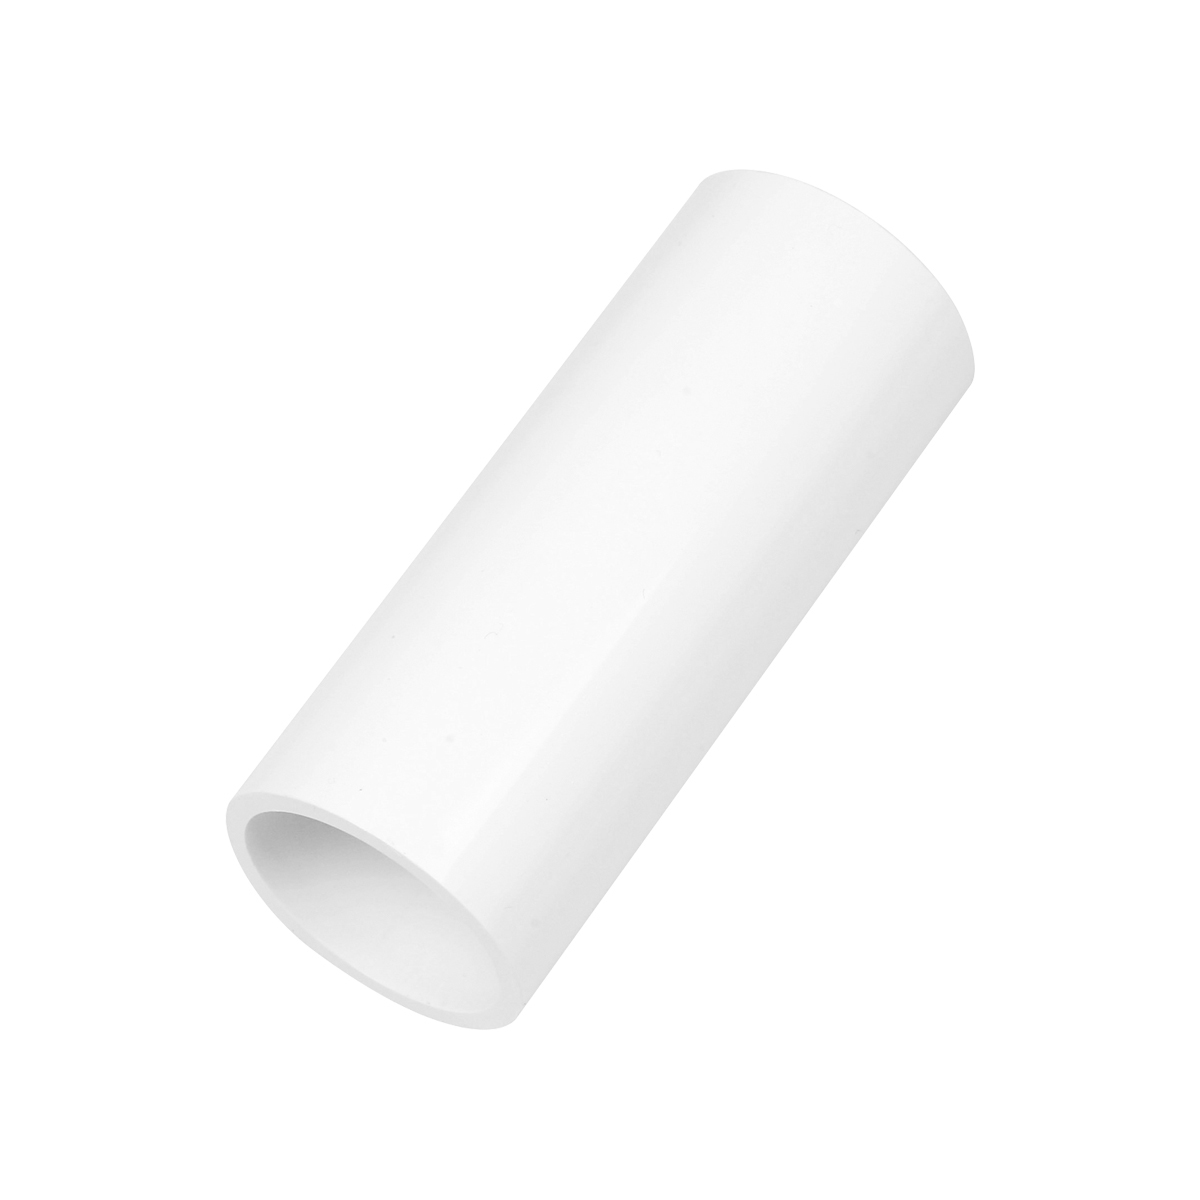 Connection for pipe-system d50 PVC white 122mm Connection for pipe-system d50 PVC white 122mm